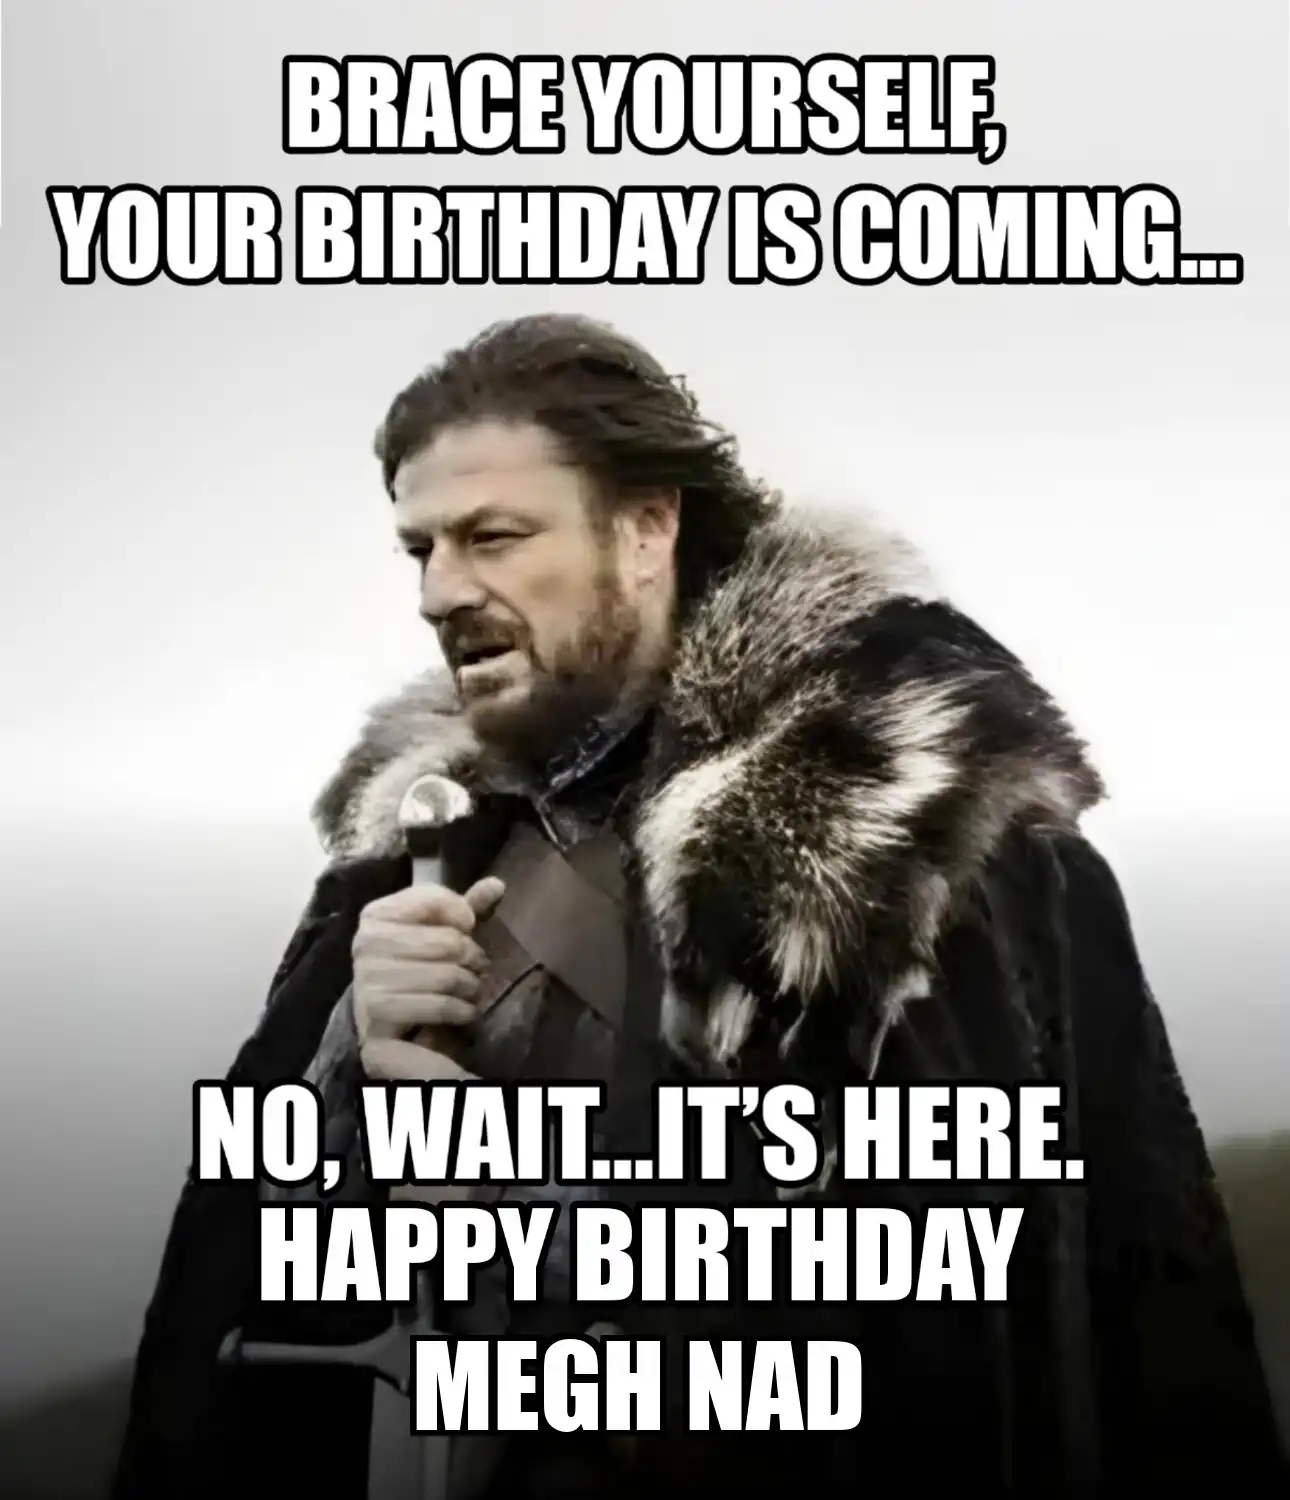 Happy Birthday Megh Nad Brace Yourself Your Birthday Is Coming Meme